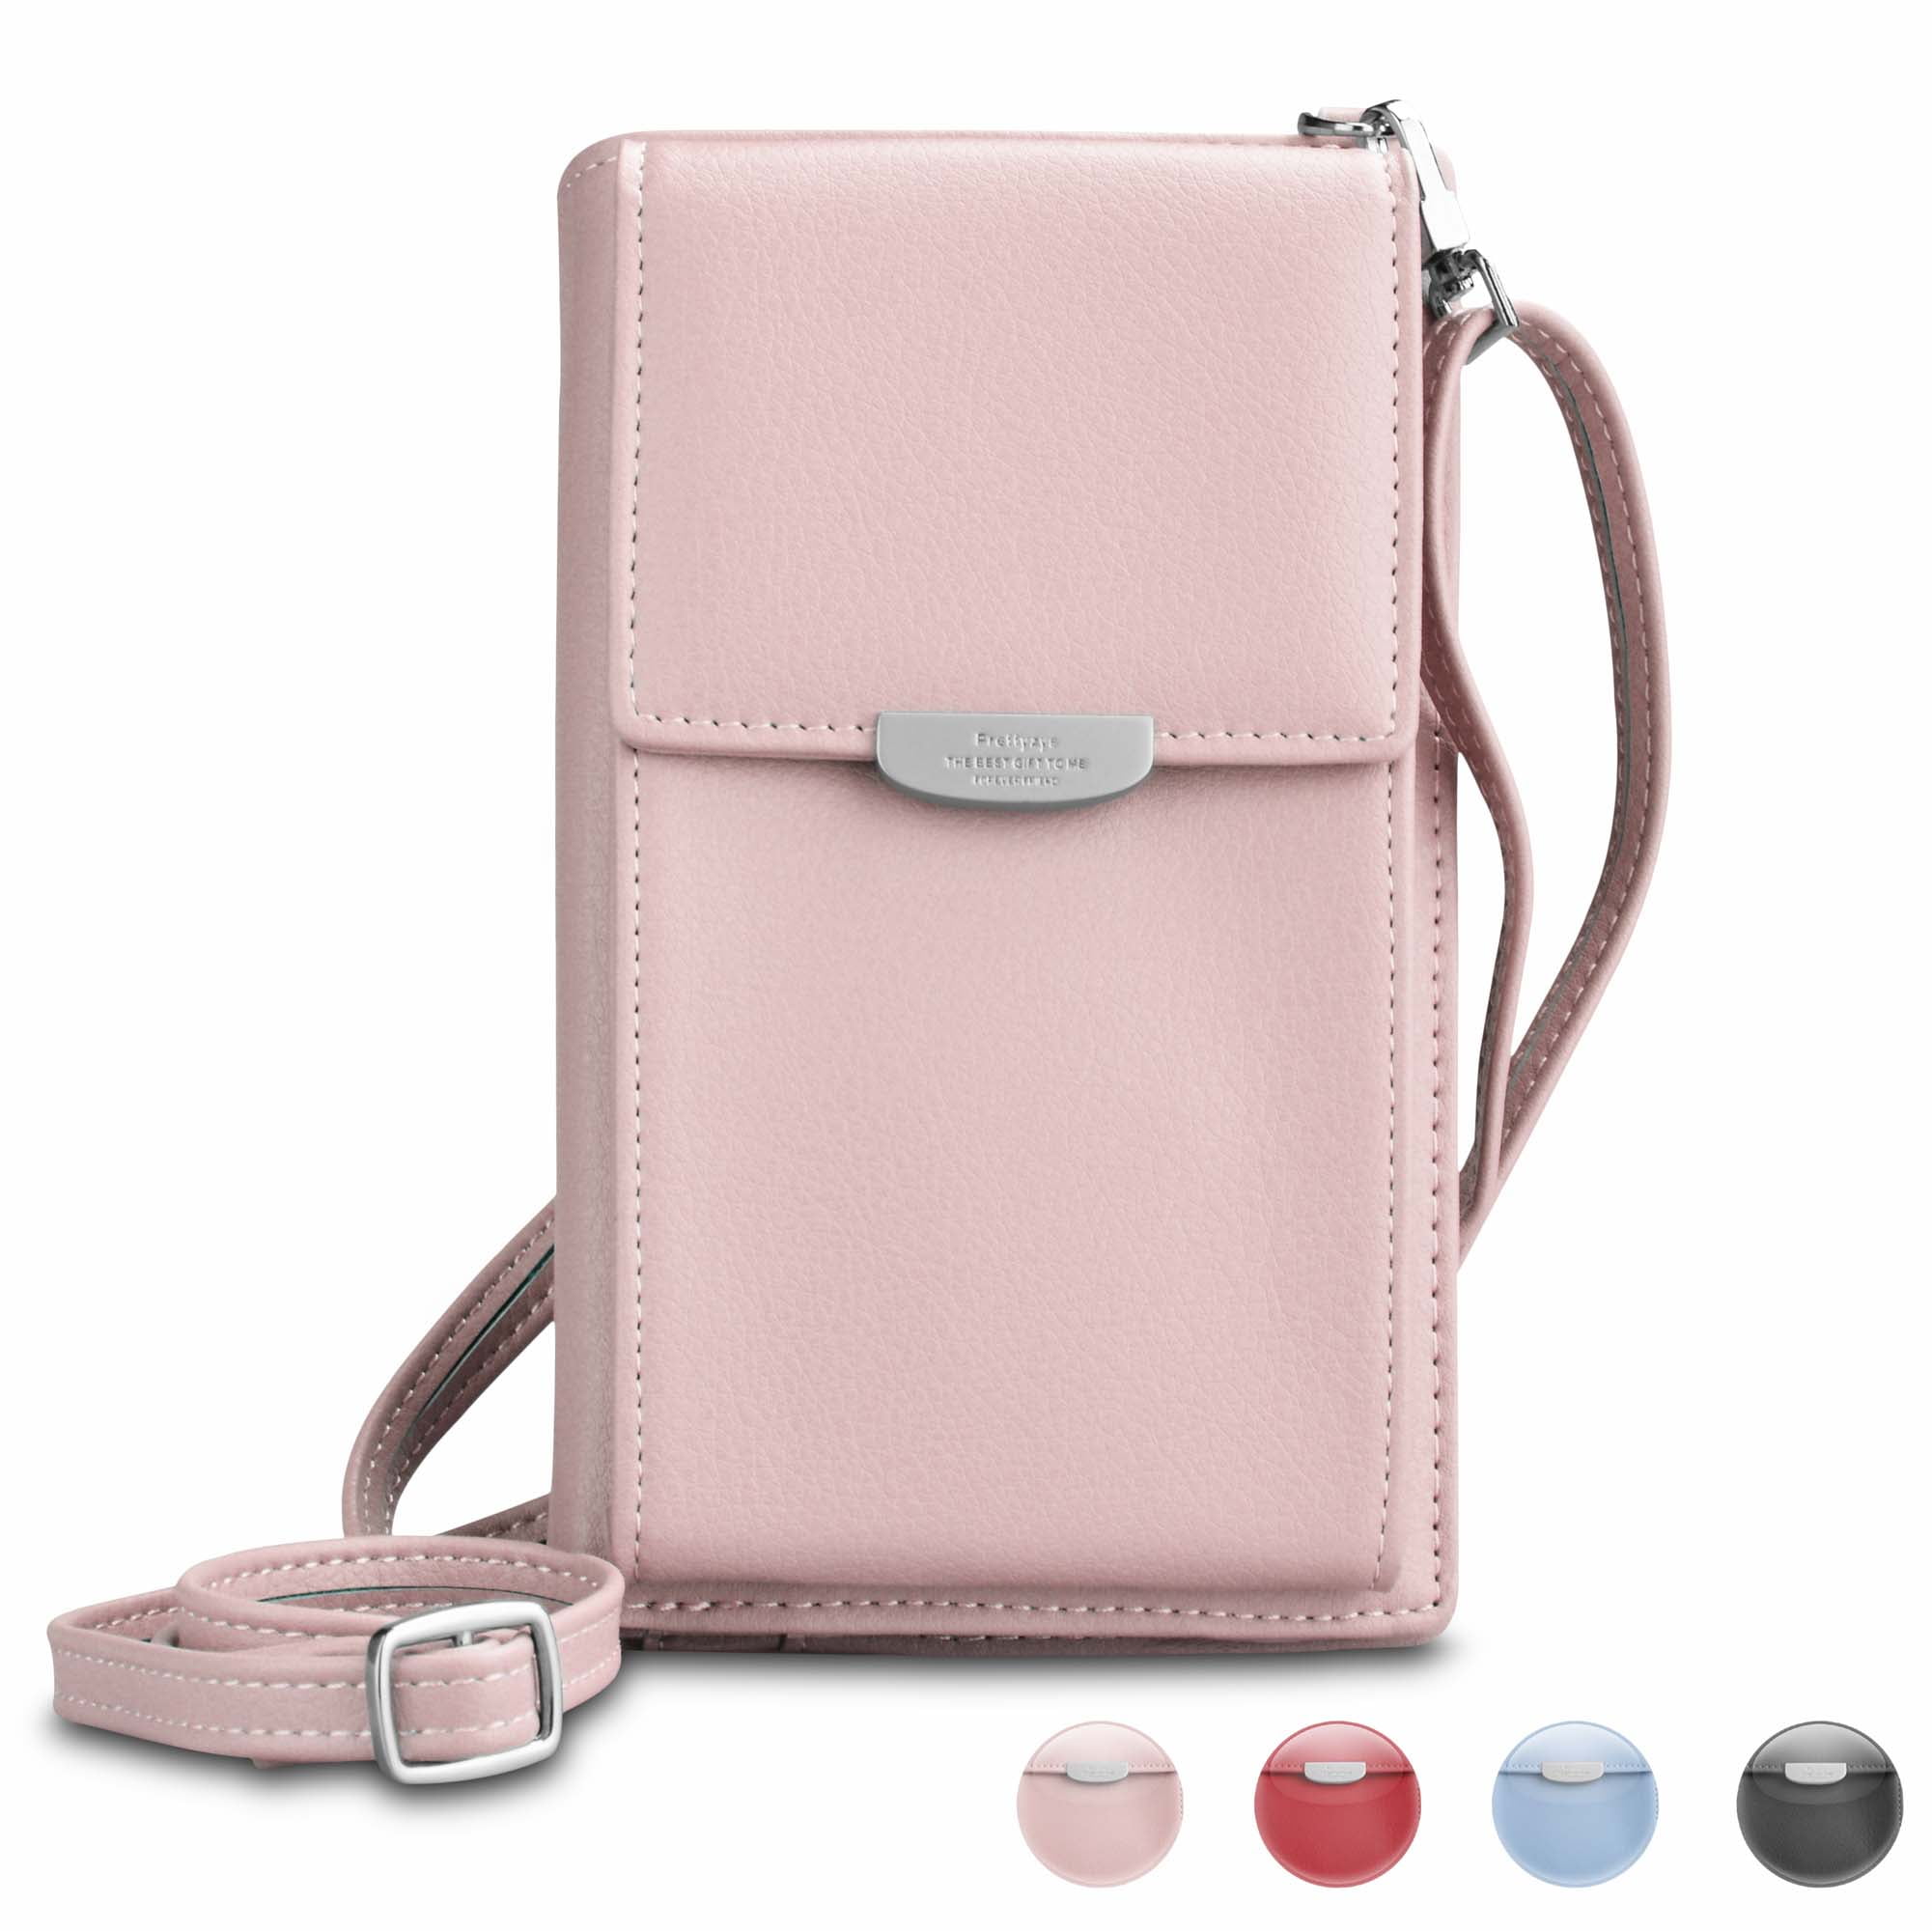 Crossbody Cell Phone Purse for Women Small Wallet Purse Shoulder Bag